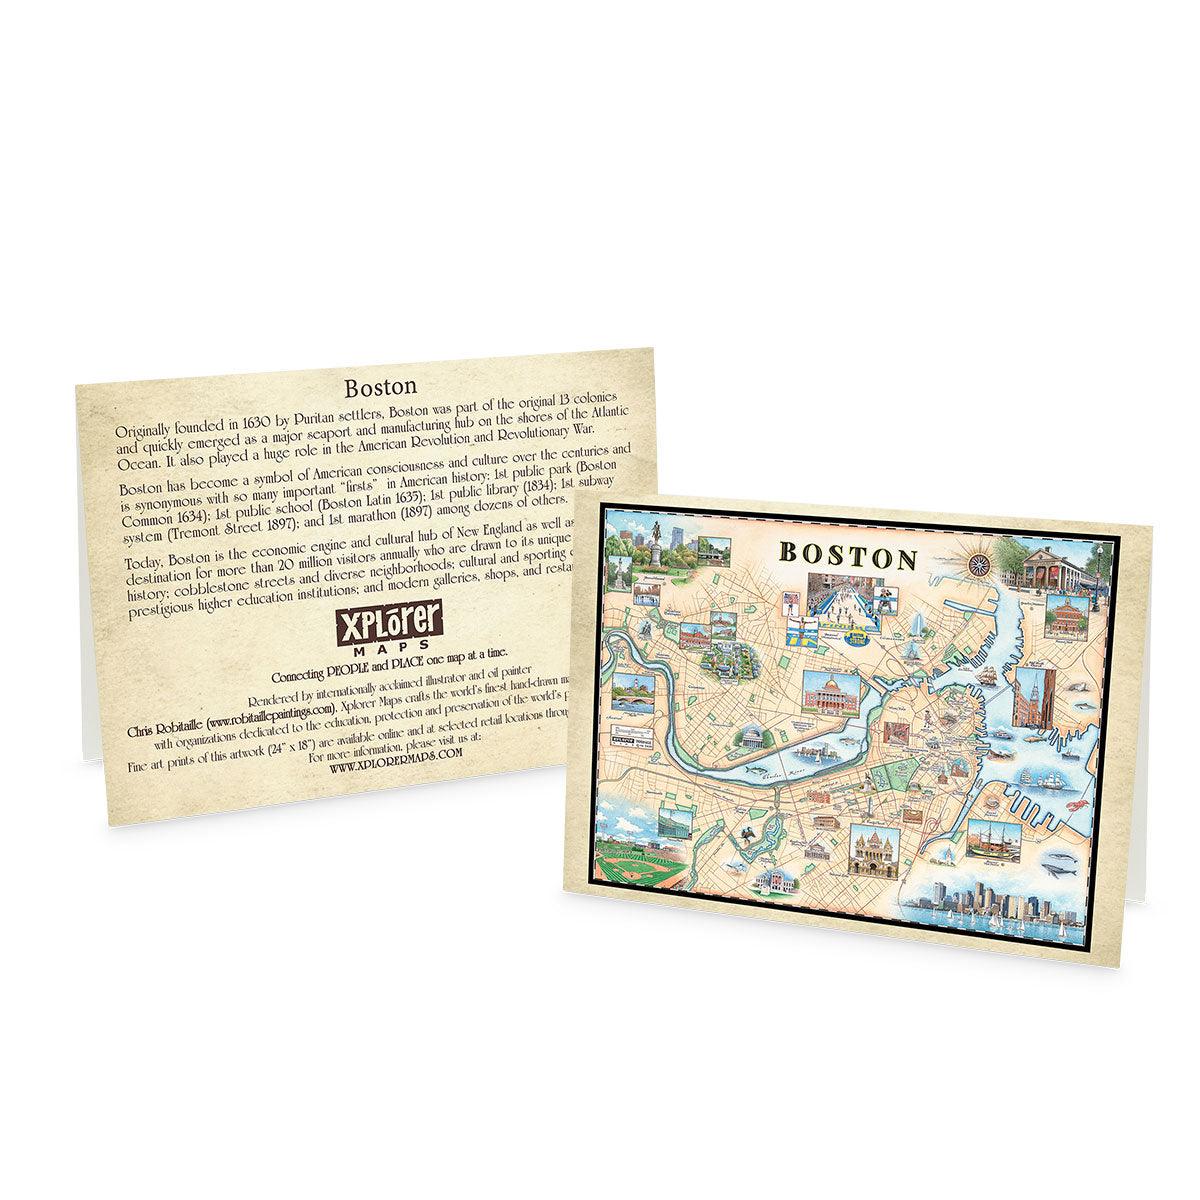 Boston city Map blank note cards in Earth Tone colors. Featuring Boston strong, Boston Marathon, Fenway Park, Museum of Fine Arts, Massachusetts State House, Bunker Hill Monument. Set of 12